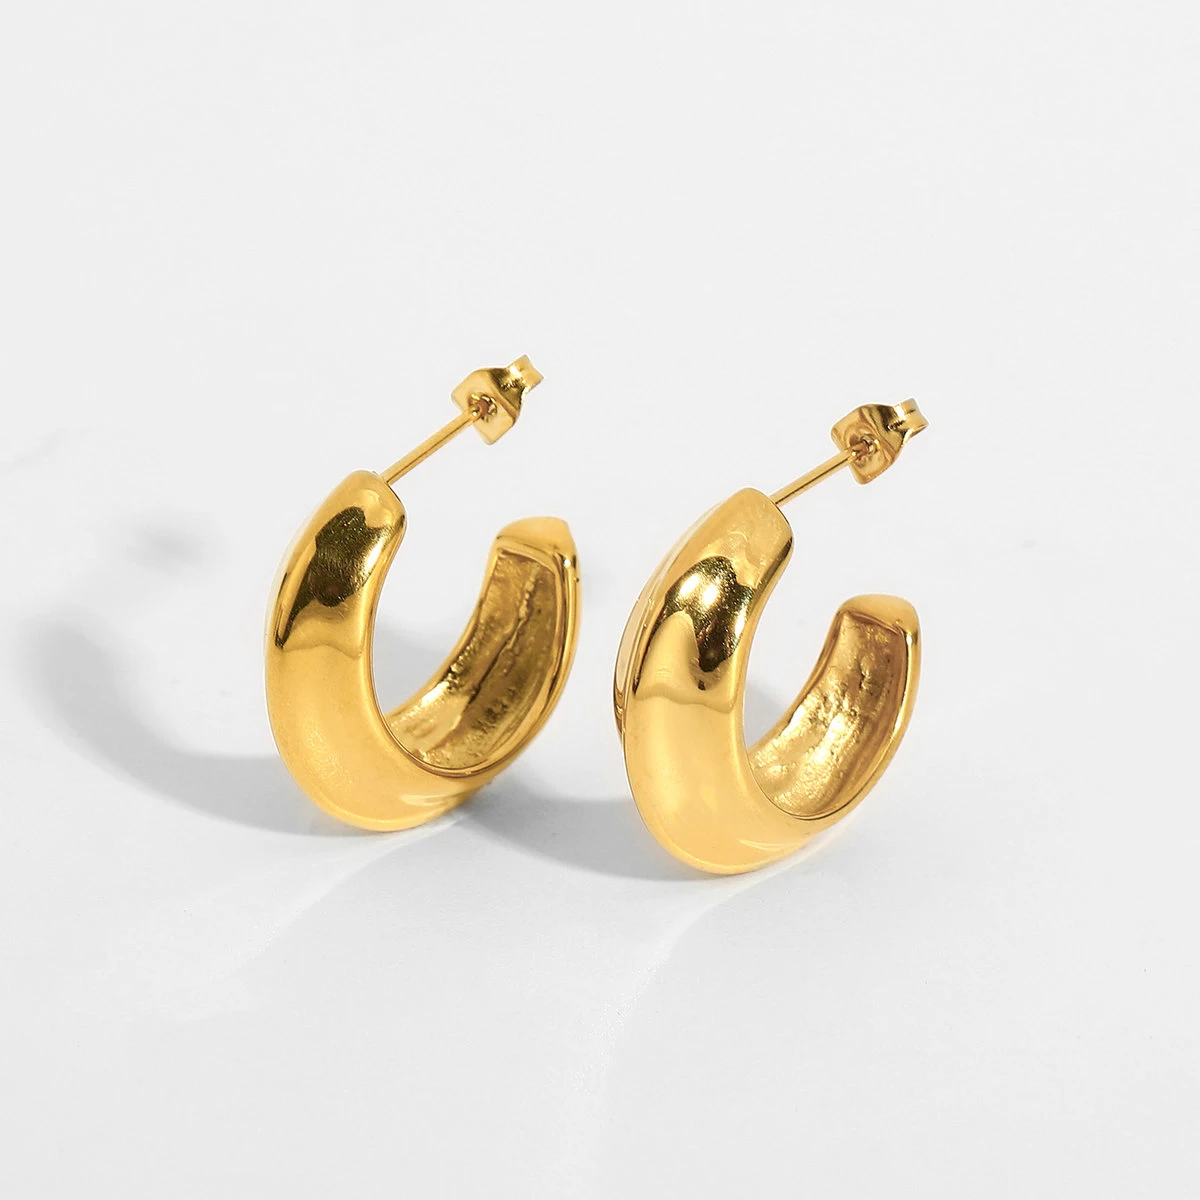 

Smooth Concave-Convex Glossy Stud Hoop Earrings for Women Jewelry Gold Color C Shape Stainless Steel Earrings